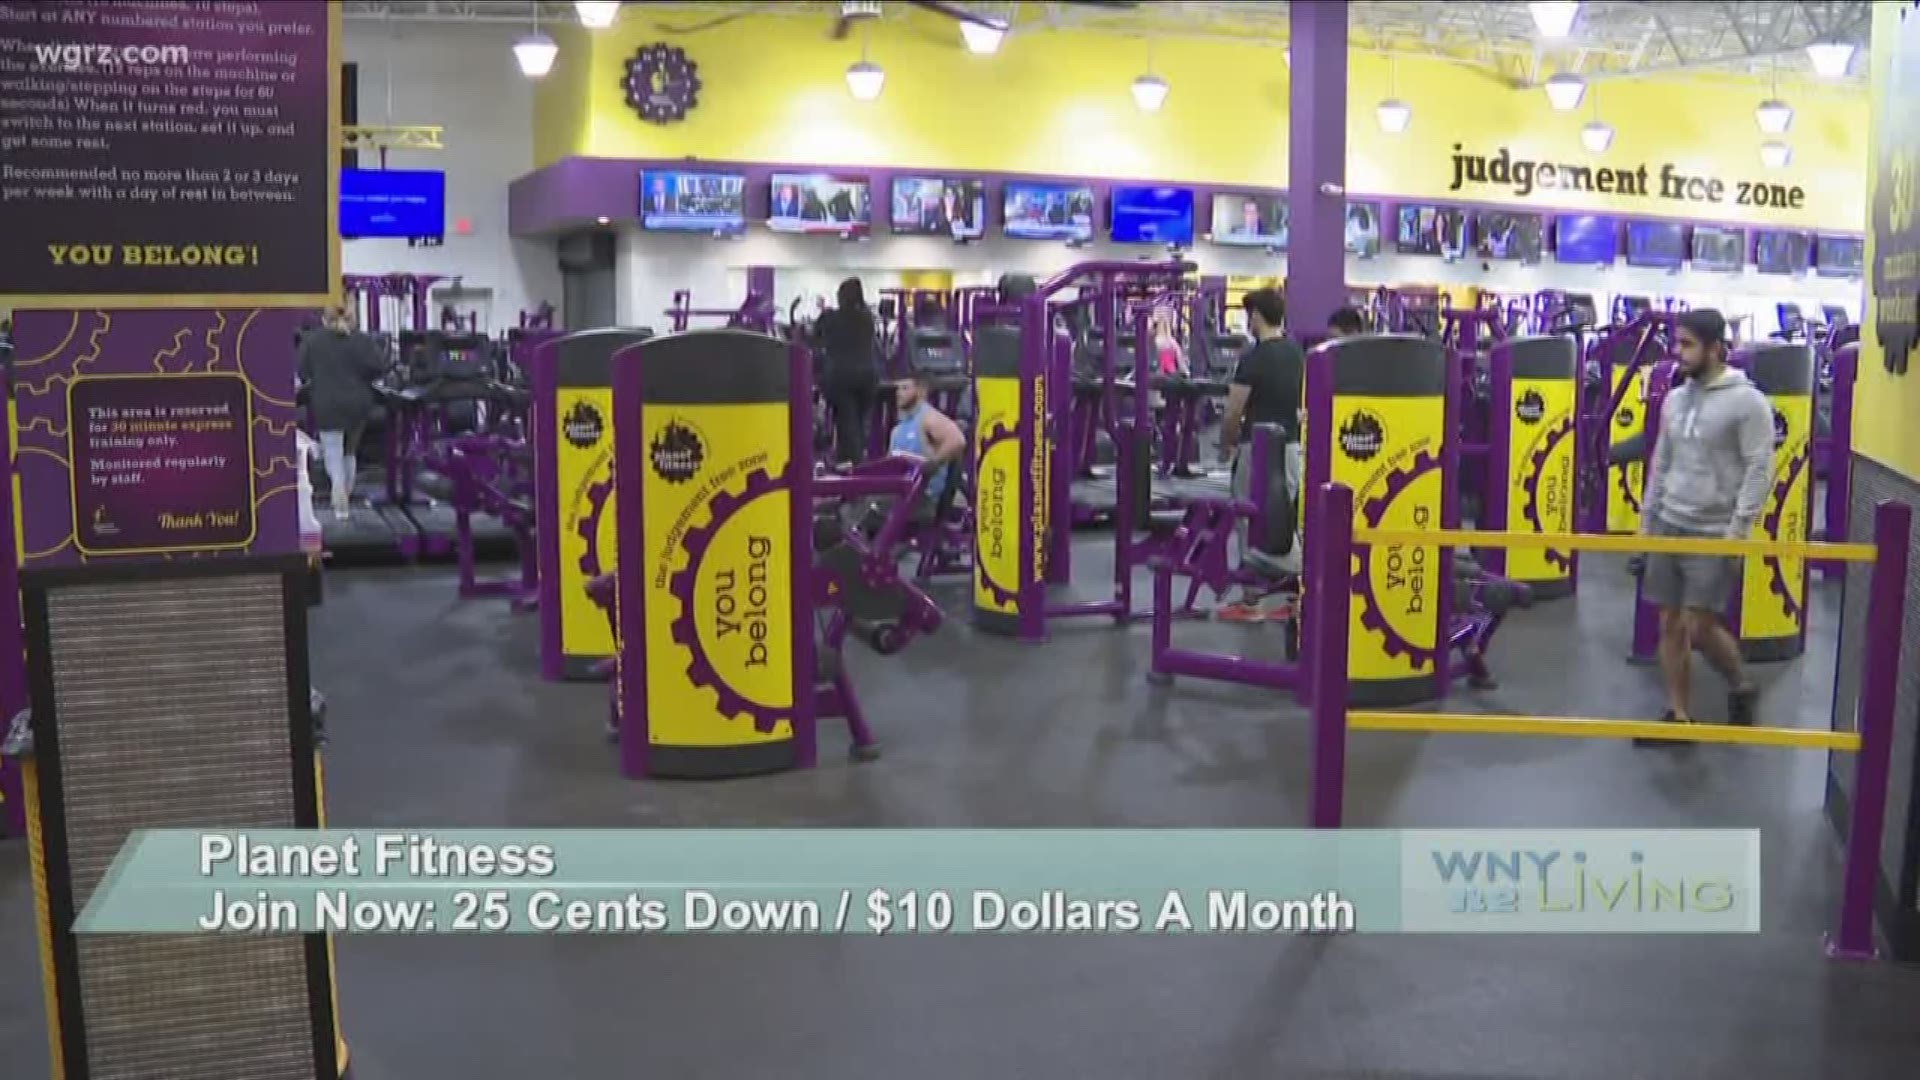 February 8 - Planet Fitness (THIS VIDEO IS SPONSORED BY PLANET FITNESS)